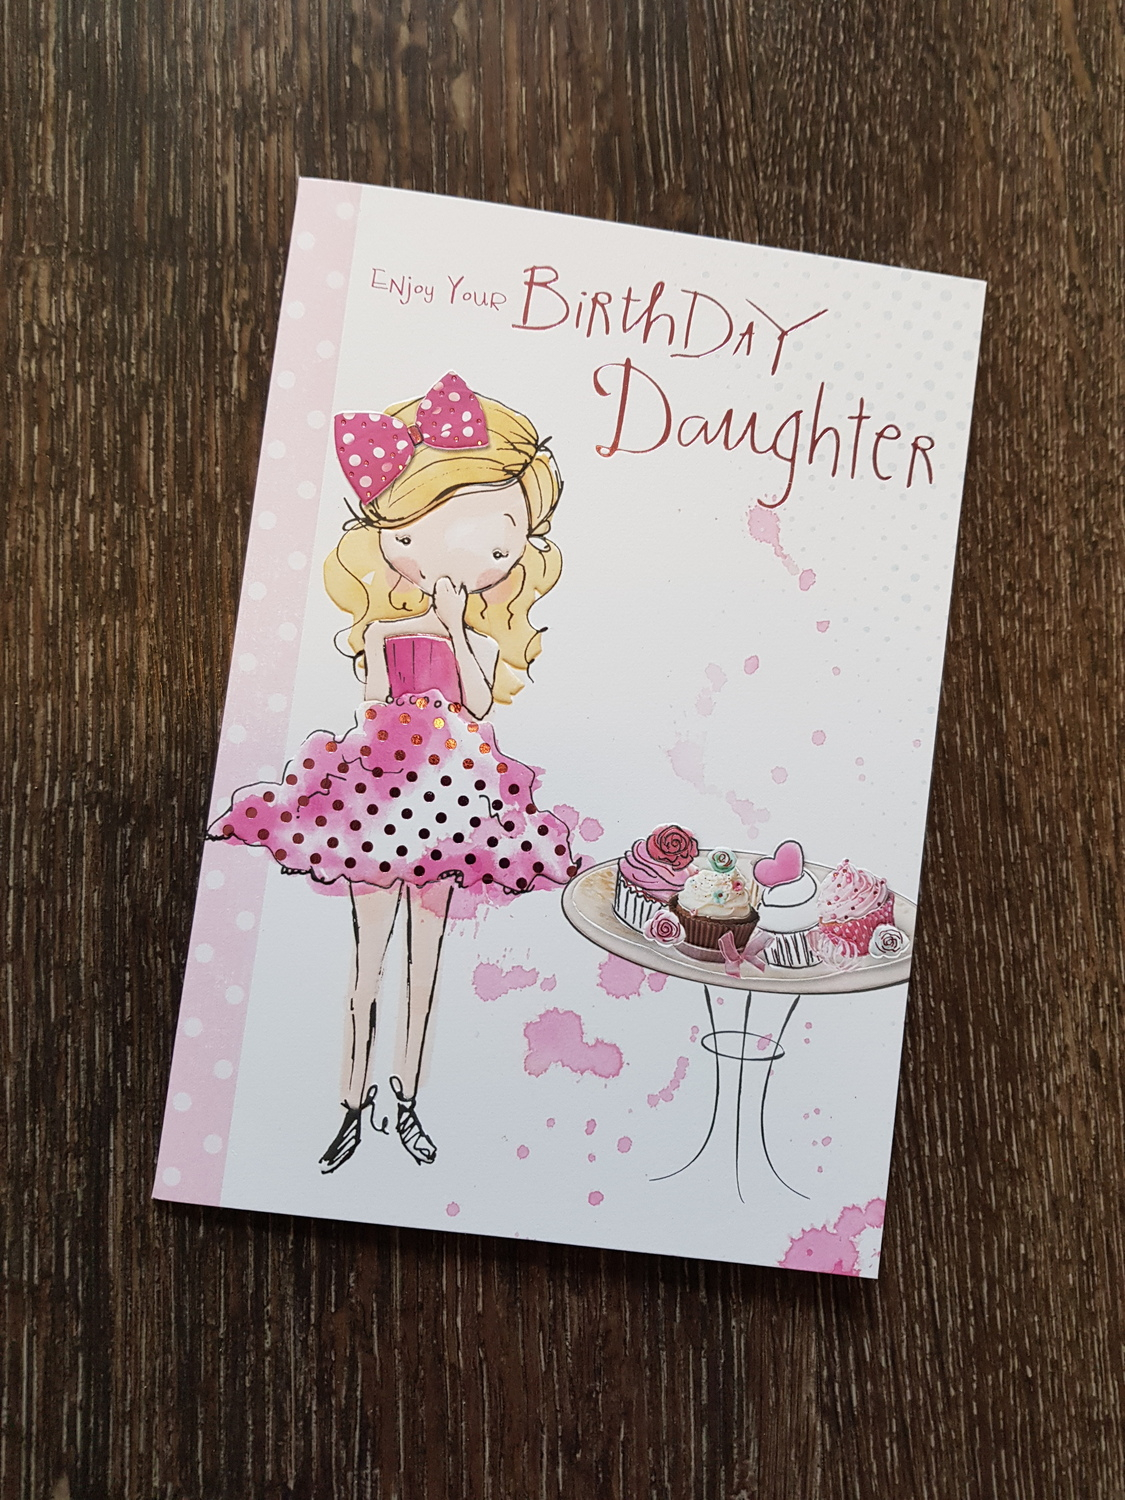 Girl Birthday Card Ideas Daughter Birthday Girl Cakes Card Remember That Card Greeting